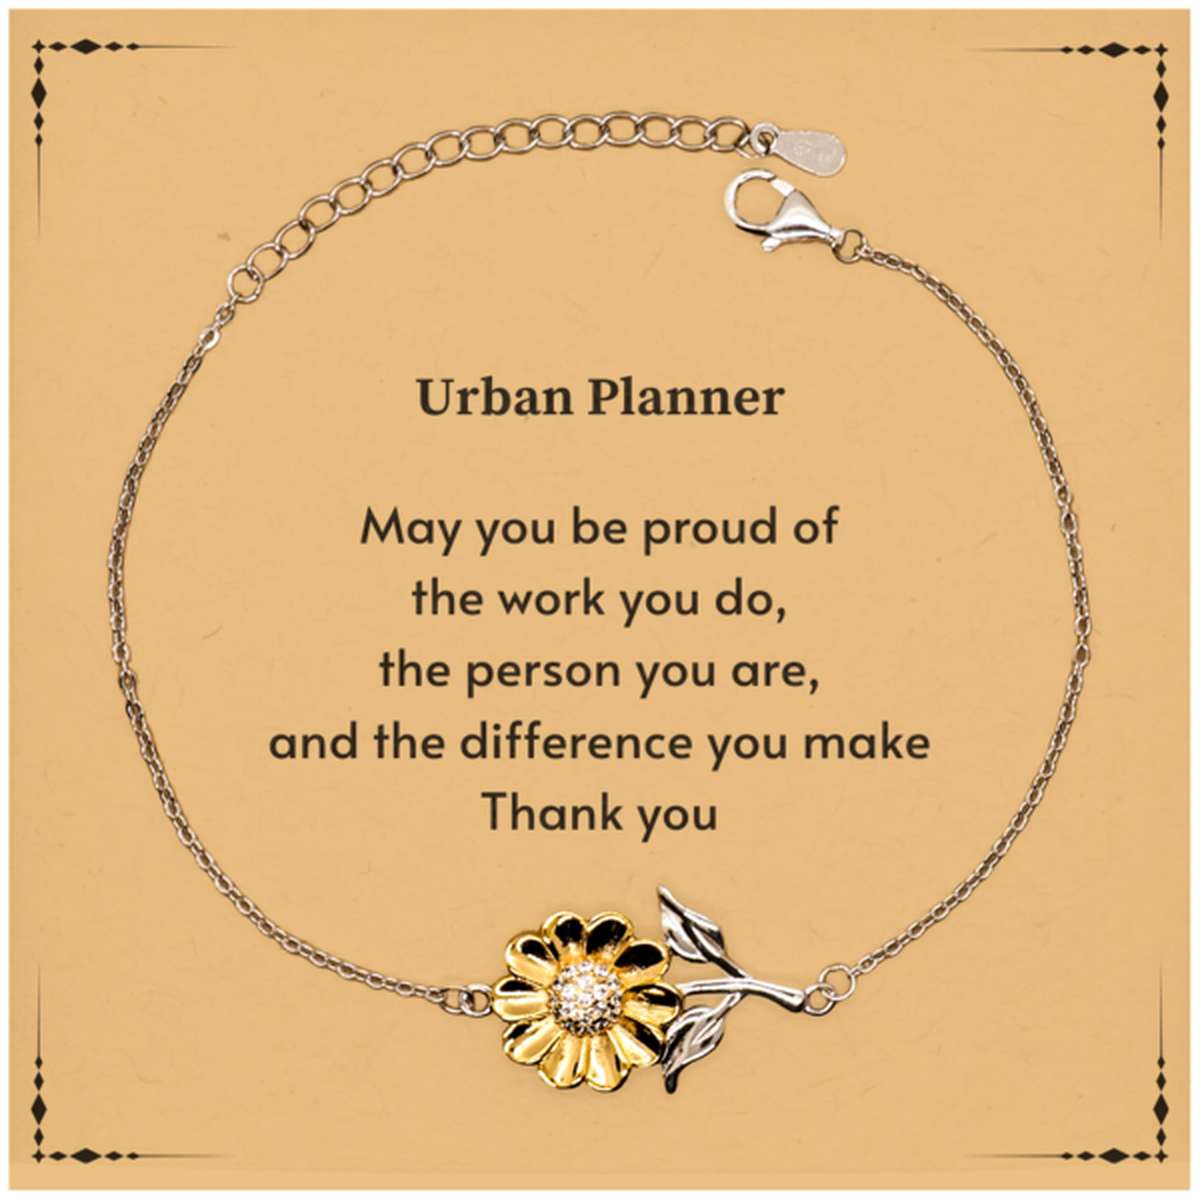 Heartwarming Sunflower Bracelet Retirement Coworkers Gifts for Urban Planner, Urban Planner May You be proud of the work you do, the person you are Gifts for Boss Men Women Friends